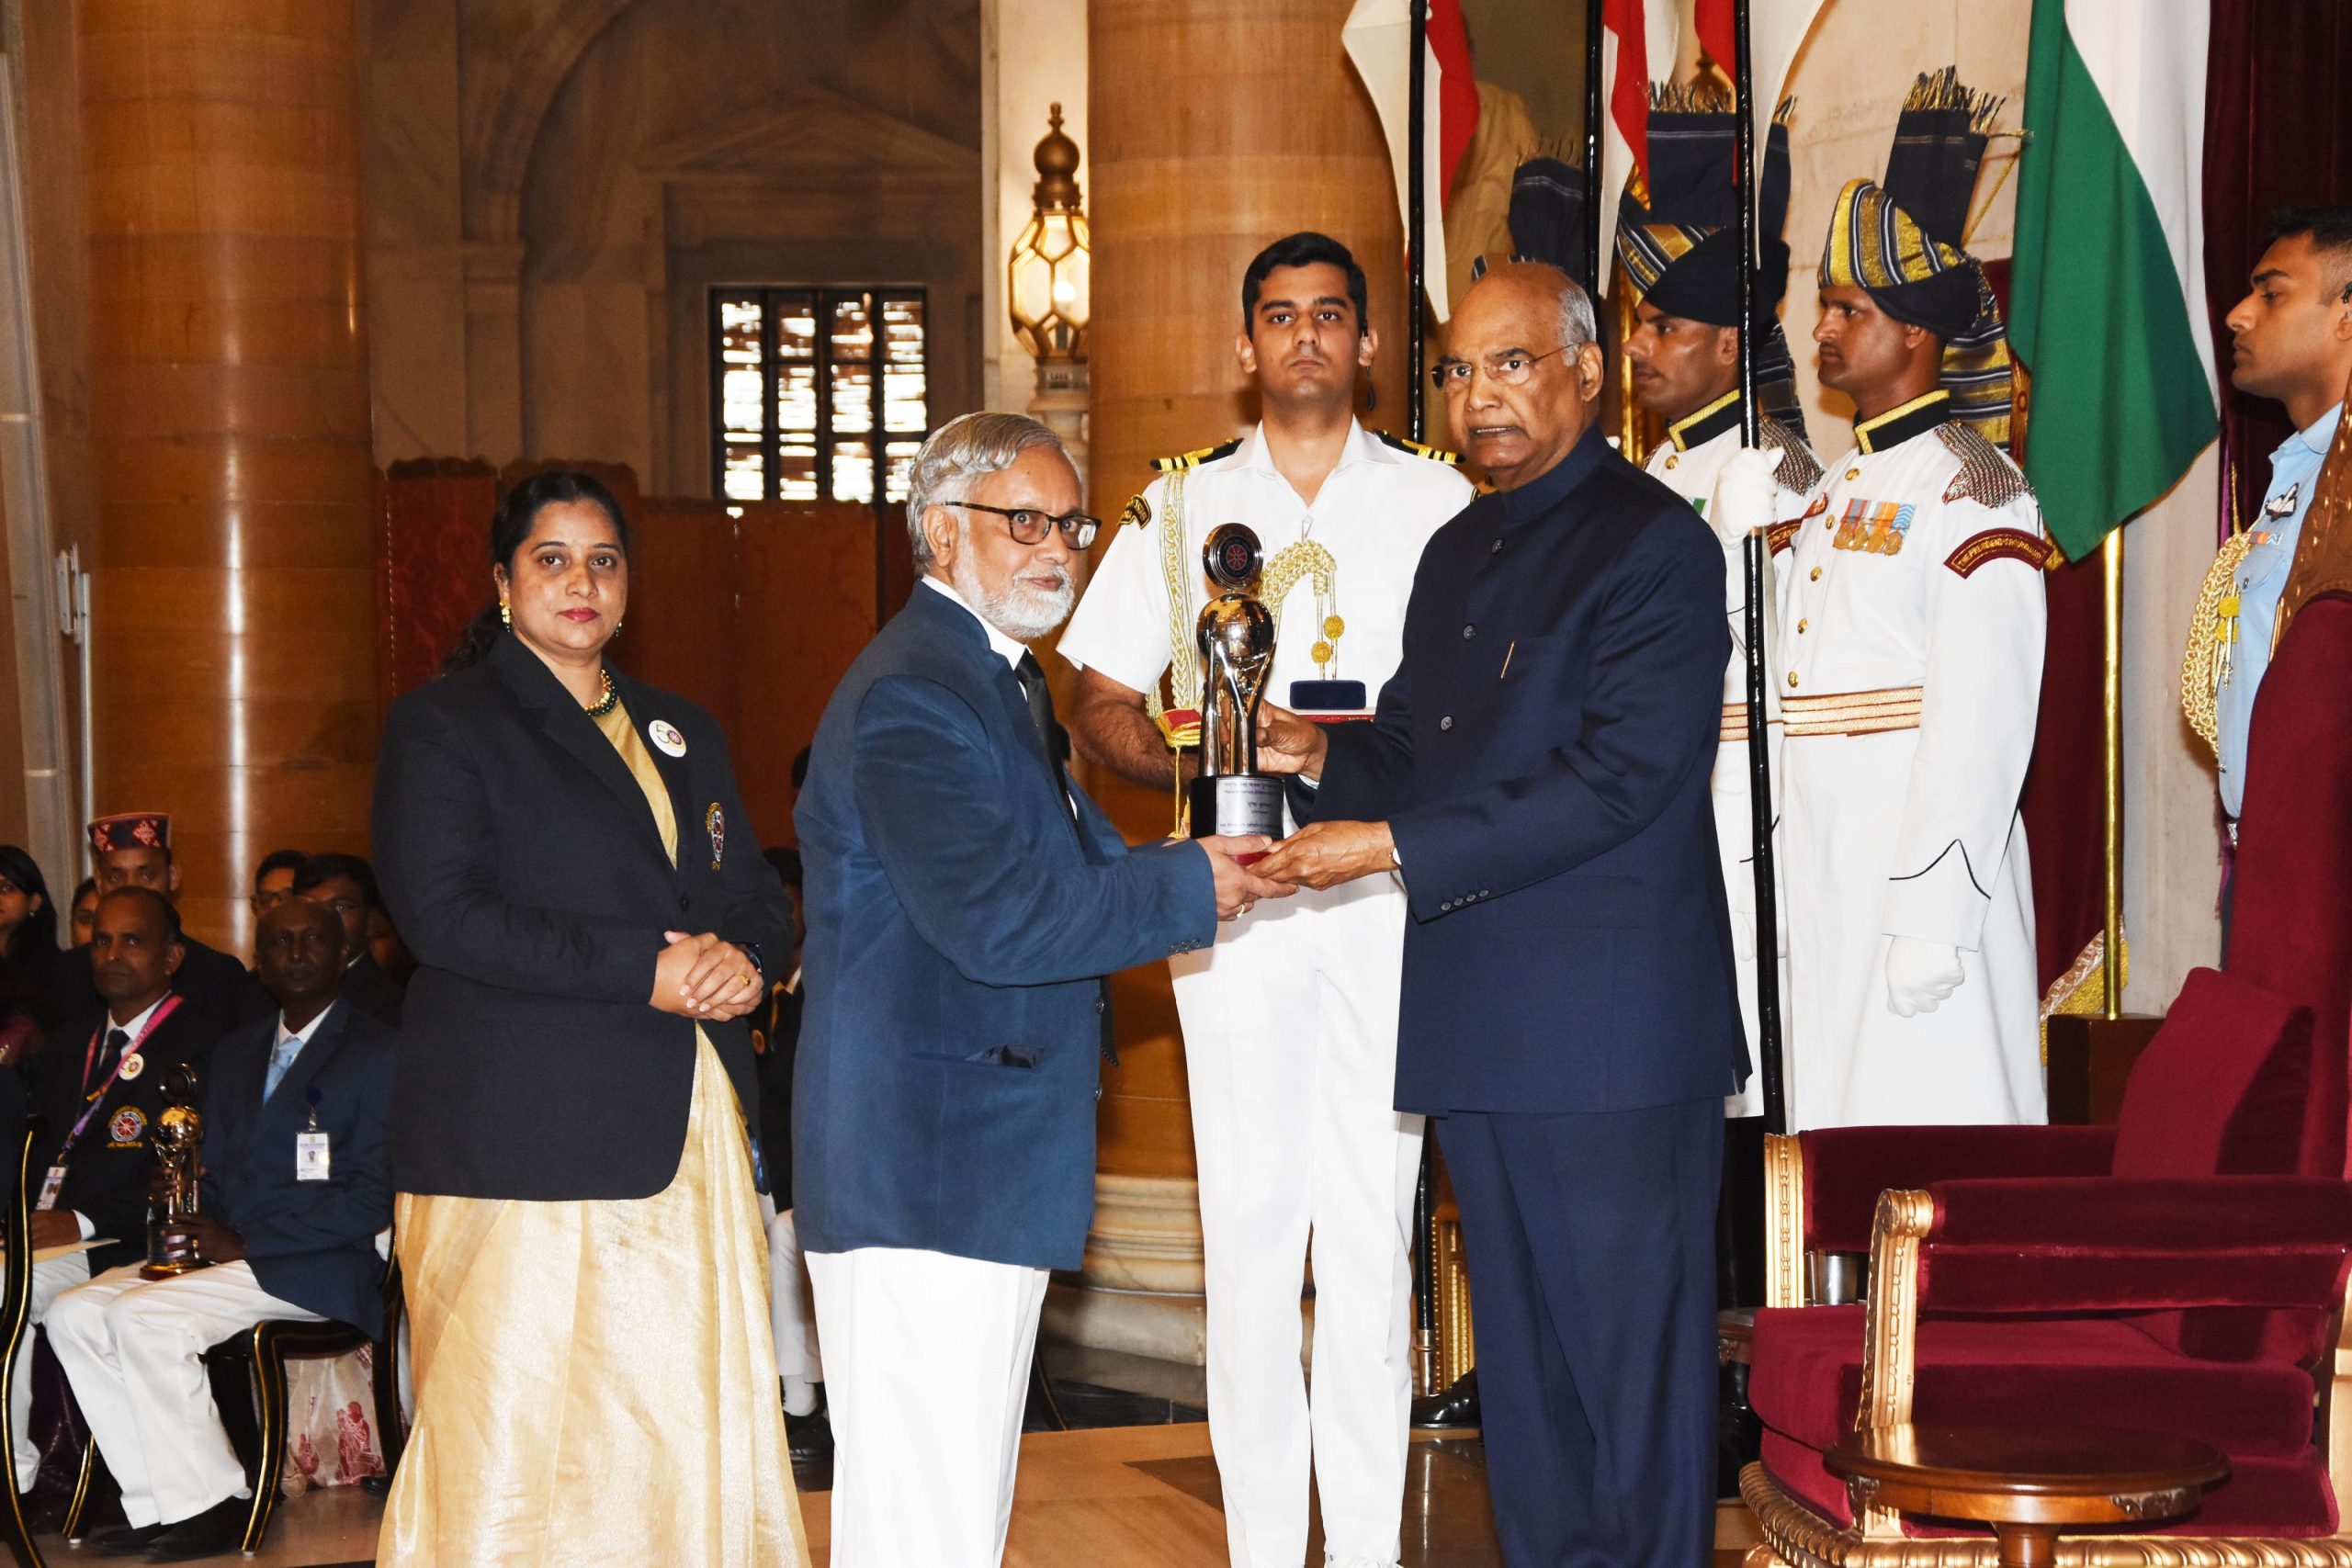 awards from president of india